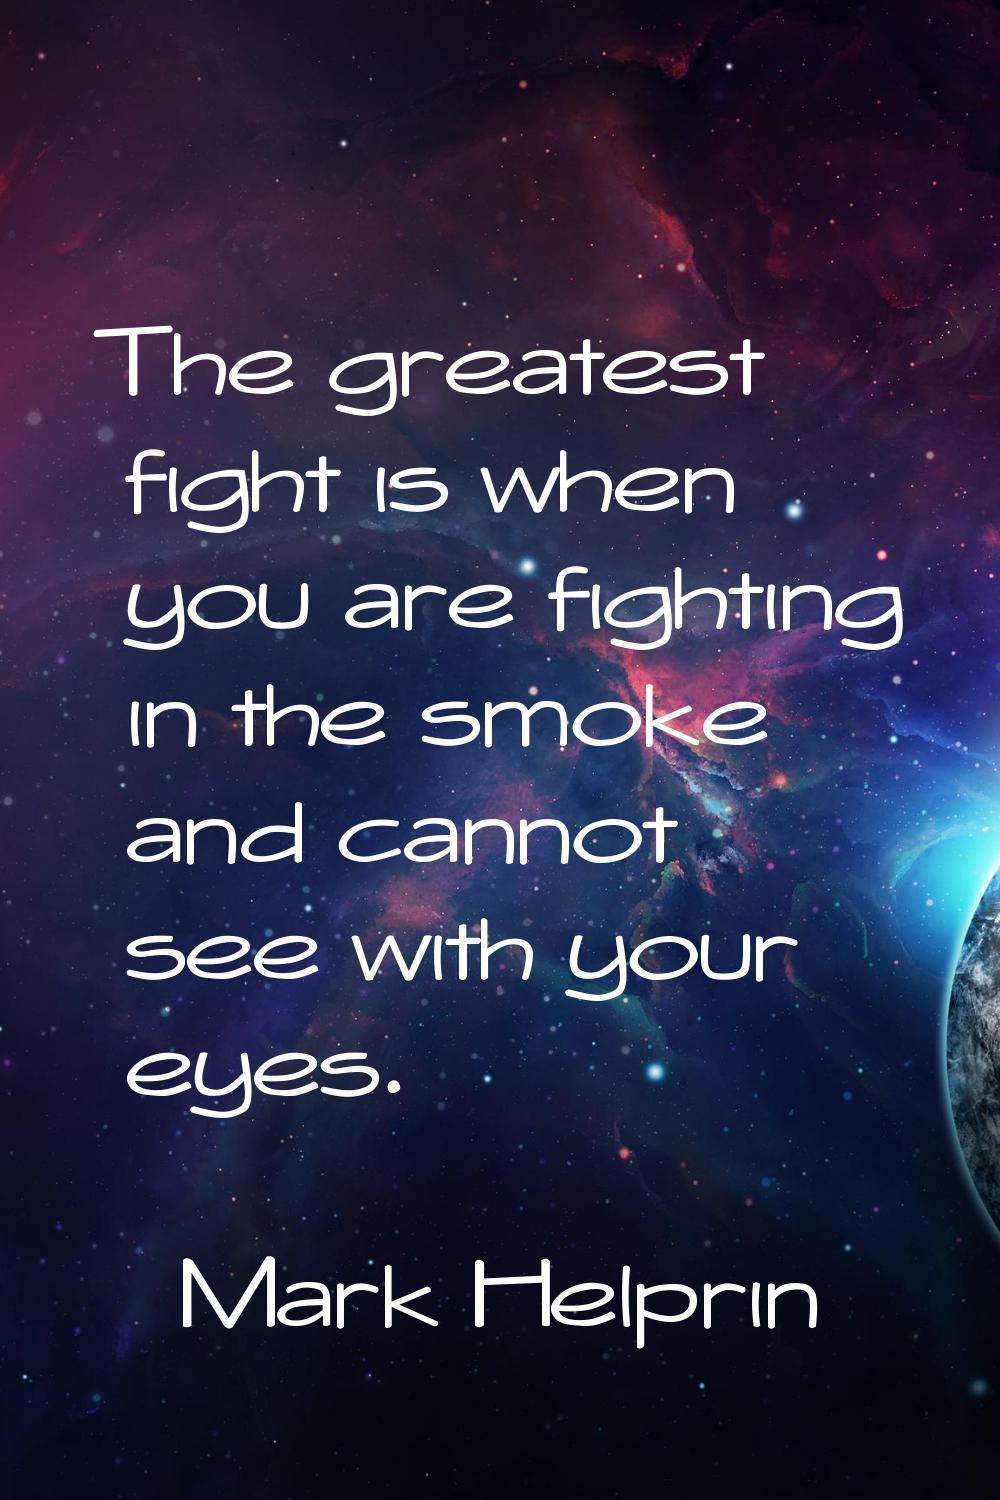 The greatest fight is when you are fighting in the smoke and cannot see with your eyes.